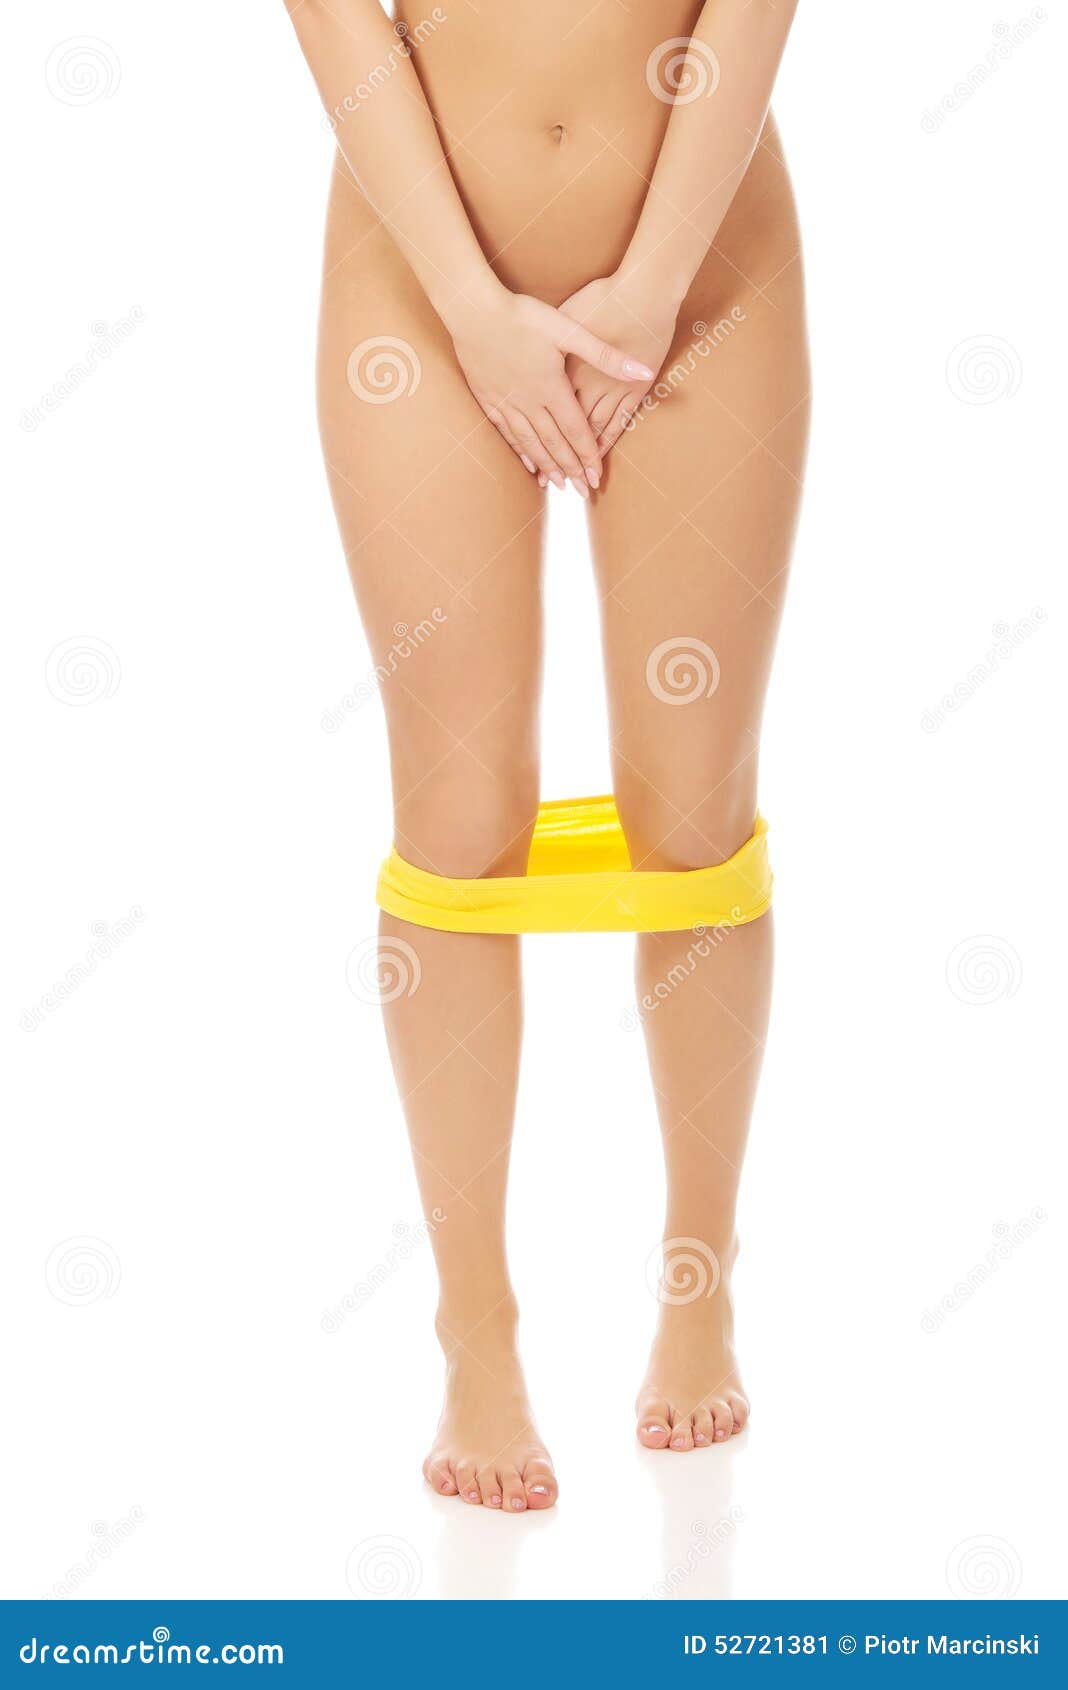 https://thumbs.dreamstime.com/z/undressed-woman-holding-her-crotch-young-painful-52721381.jpg